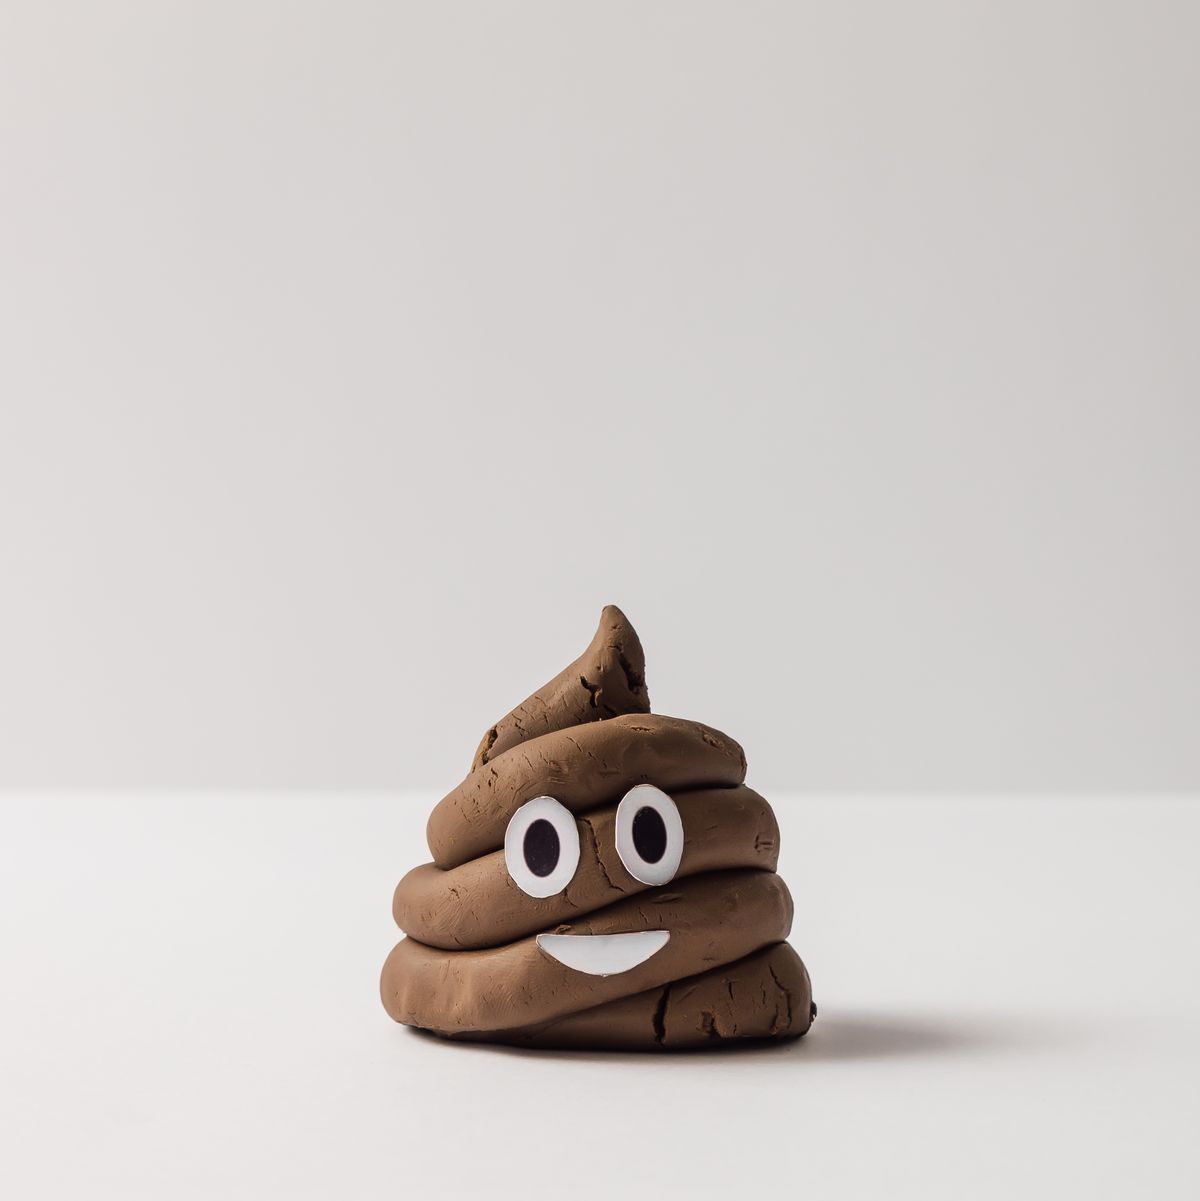 Why Does it Feel Good to Poop?